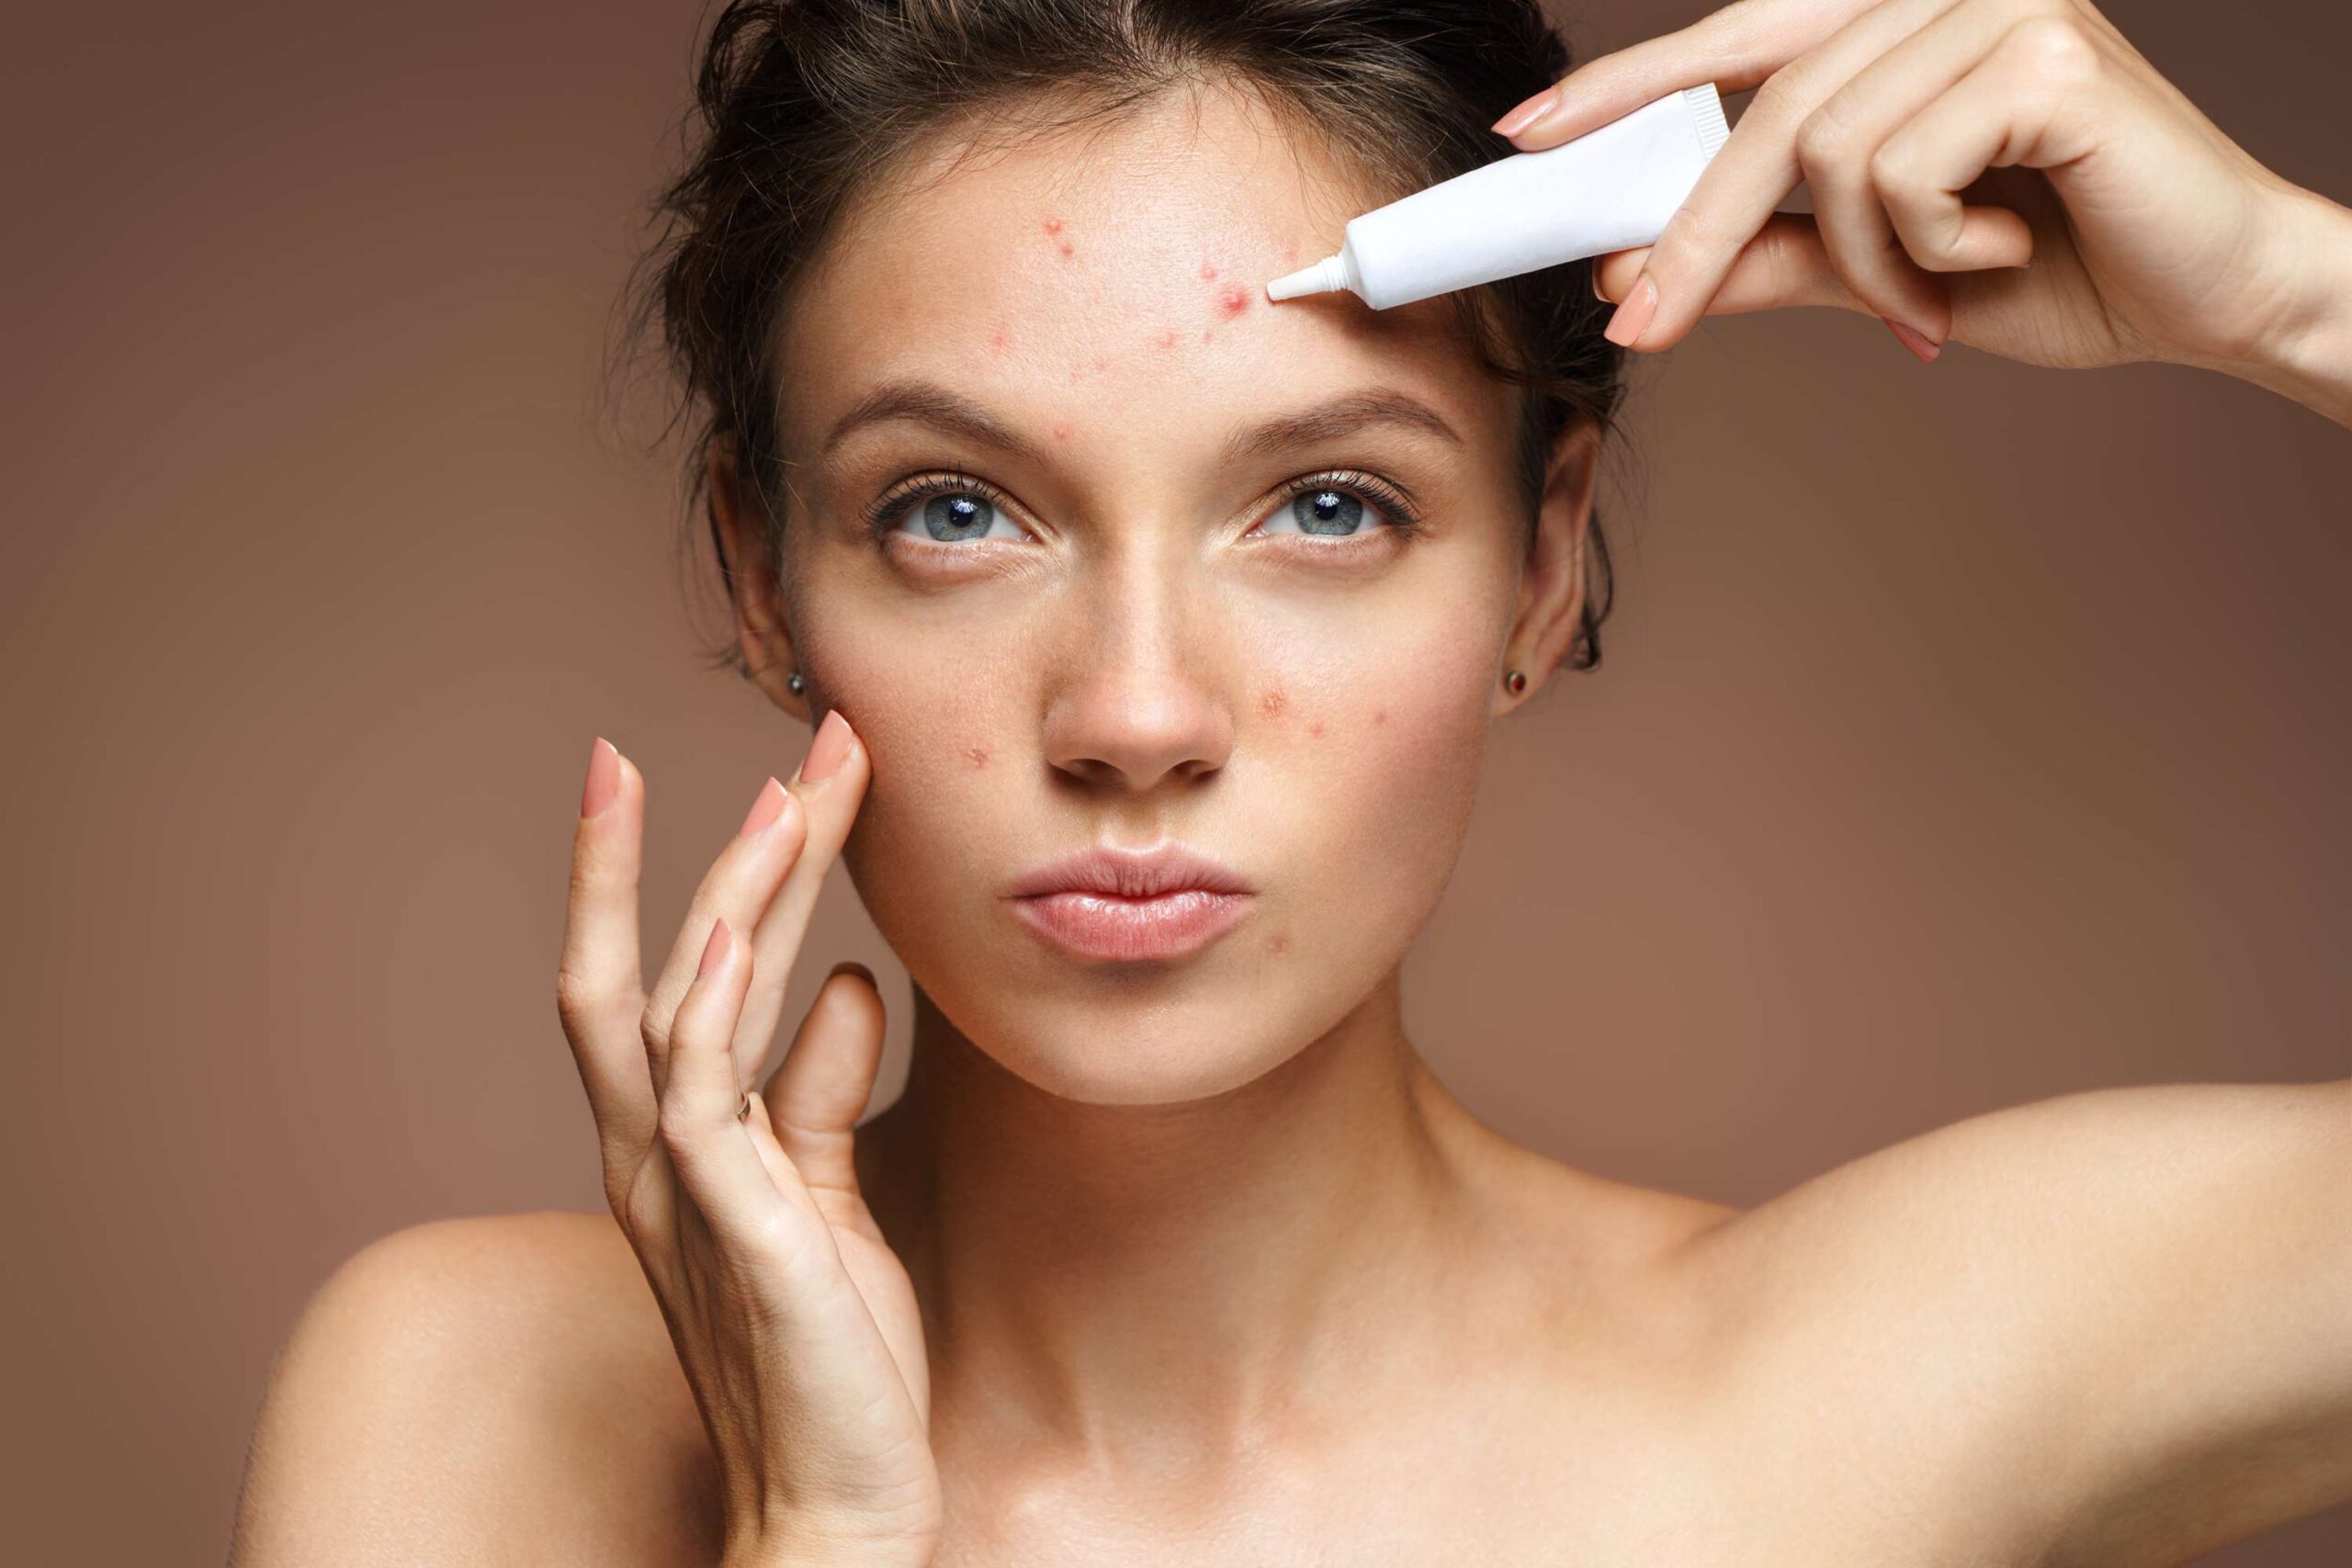 A women putting Cream on her face | New Look Skin Center Medical Spa in Glendale, Encino and Irvine, CA